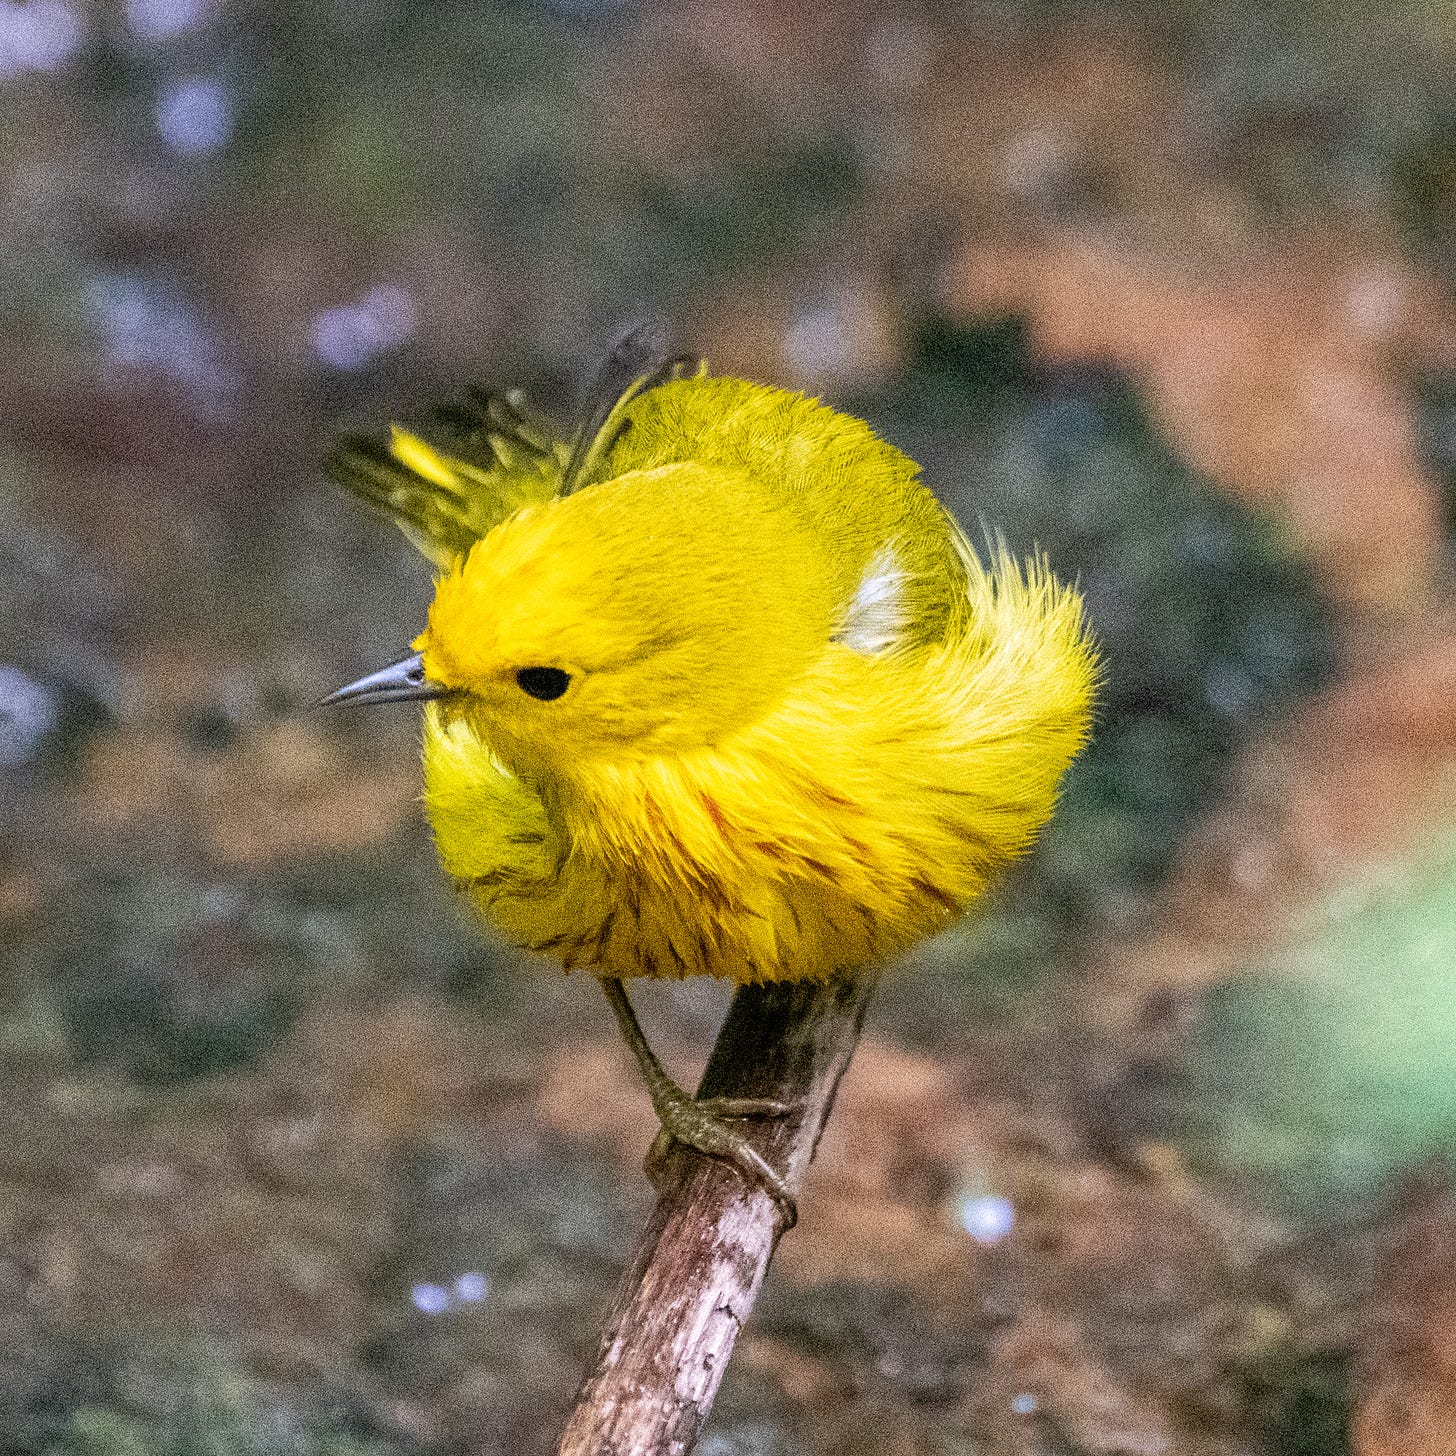 A wet yellow warbler perched on a branch over a creek, its head swiveled to look behind it